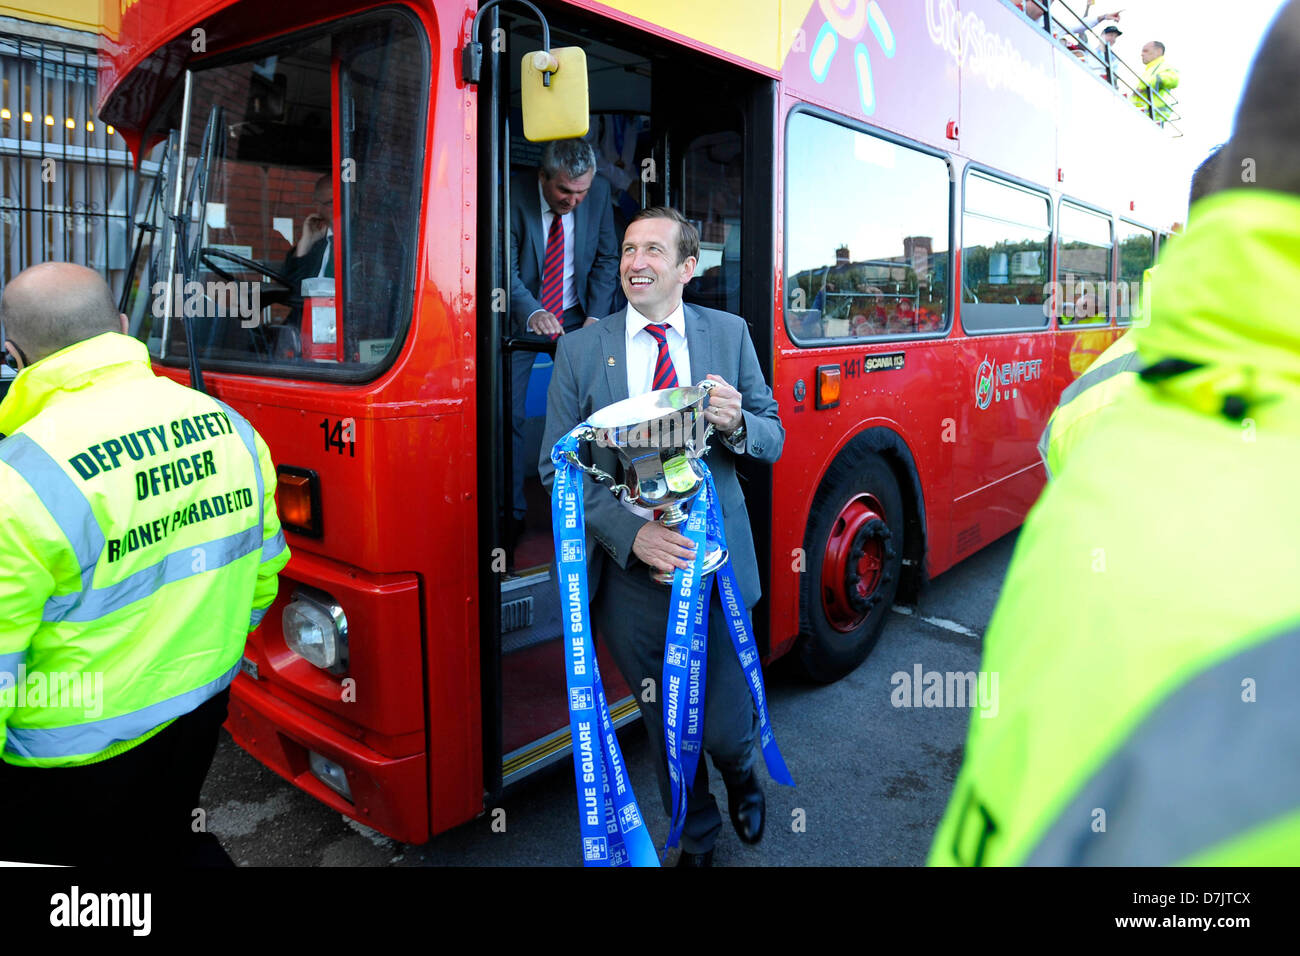 Newport, Wales, UK. 8th May 2013. 080513  Newport County FC celebrate their return to Football League with a victory parade on an open top bus through Newport town Centre.  Newport County FC manager Justin Edinburgh. Credit:  Matthew Horwood / Alamy Live News Stock Photo